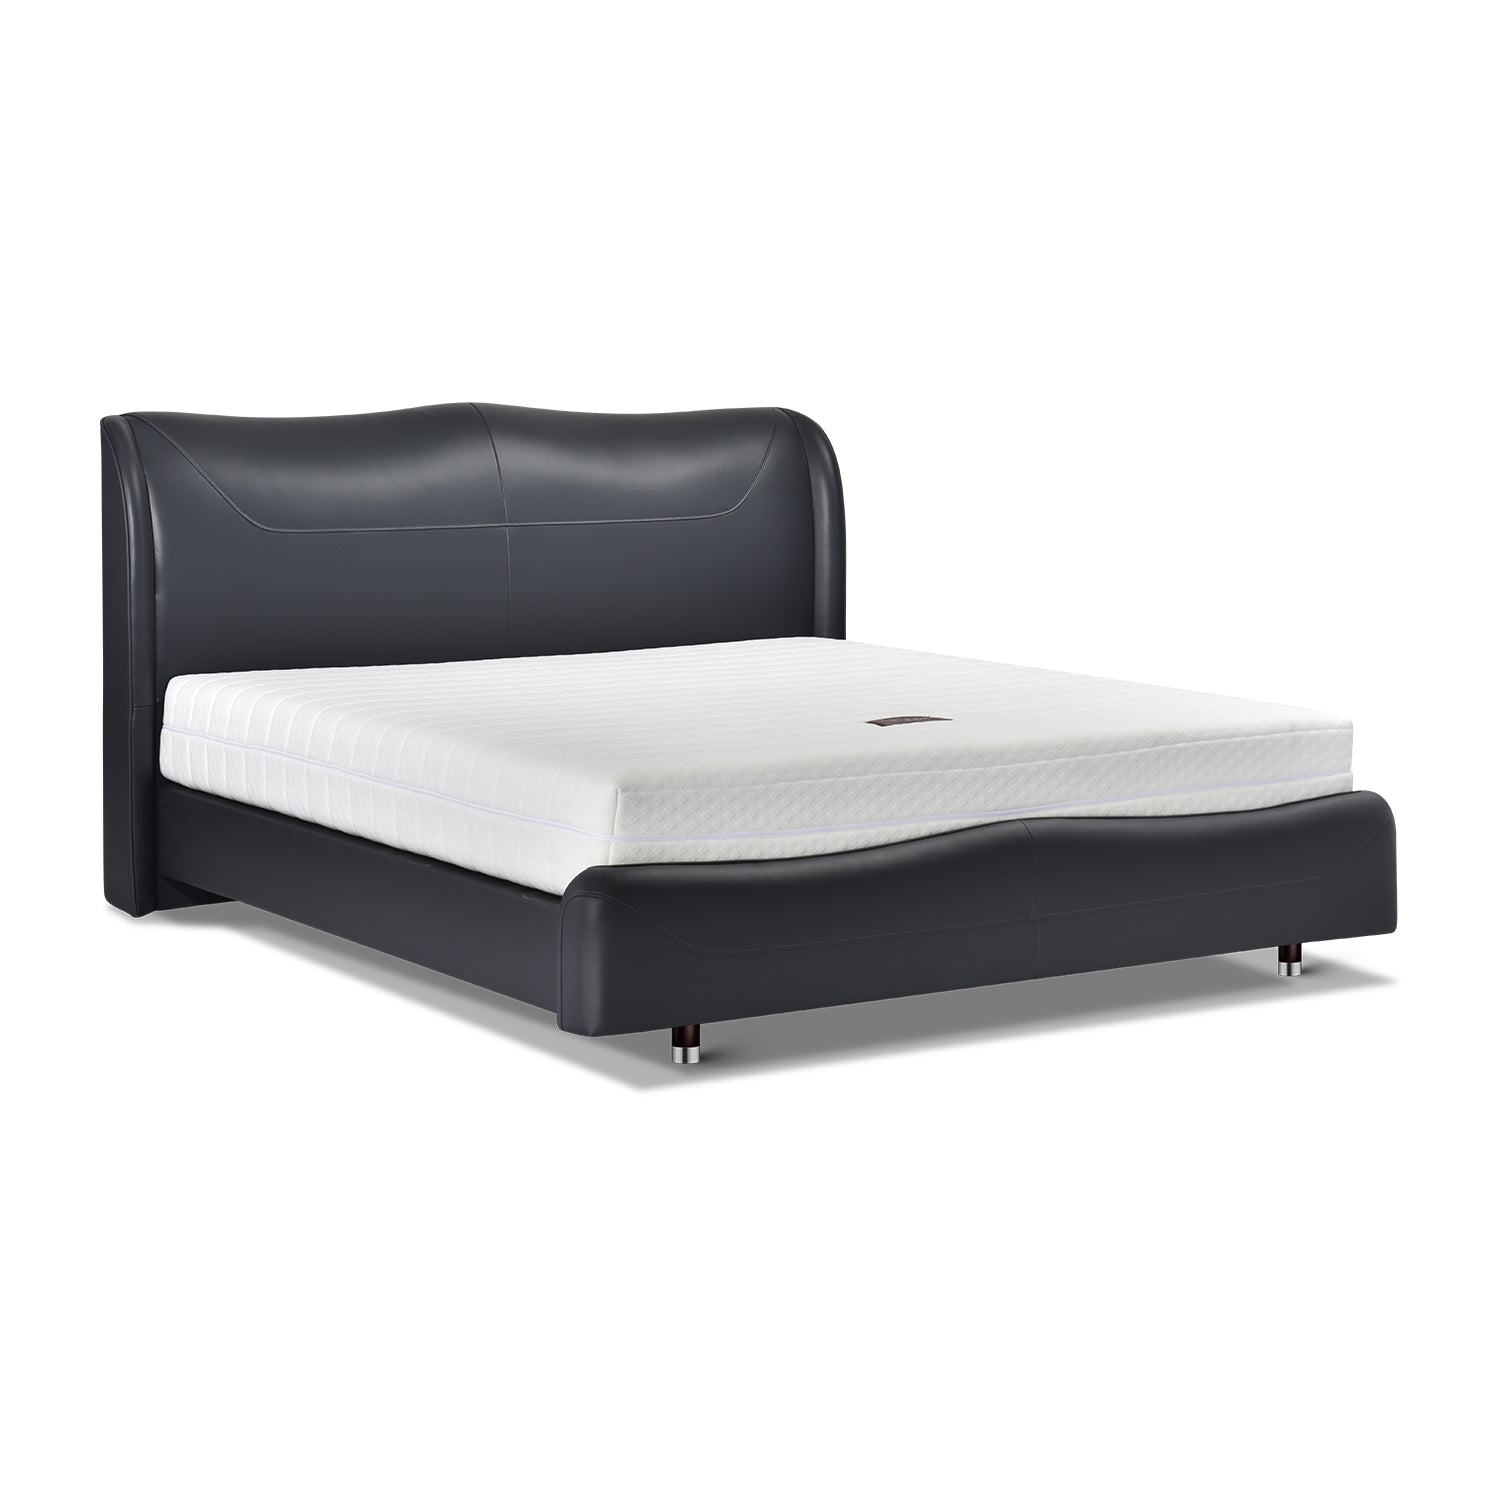 DeRUCCI Bed Frame BZZ4 - 201 in deep sea blue, modern and sleek design with high elastic sponge protection at the end.